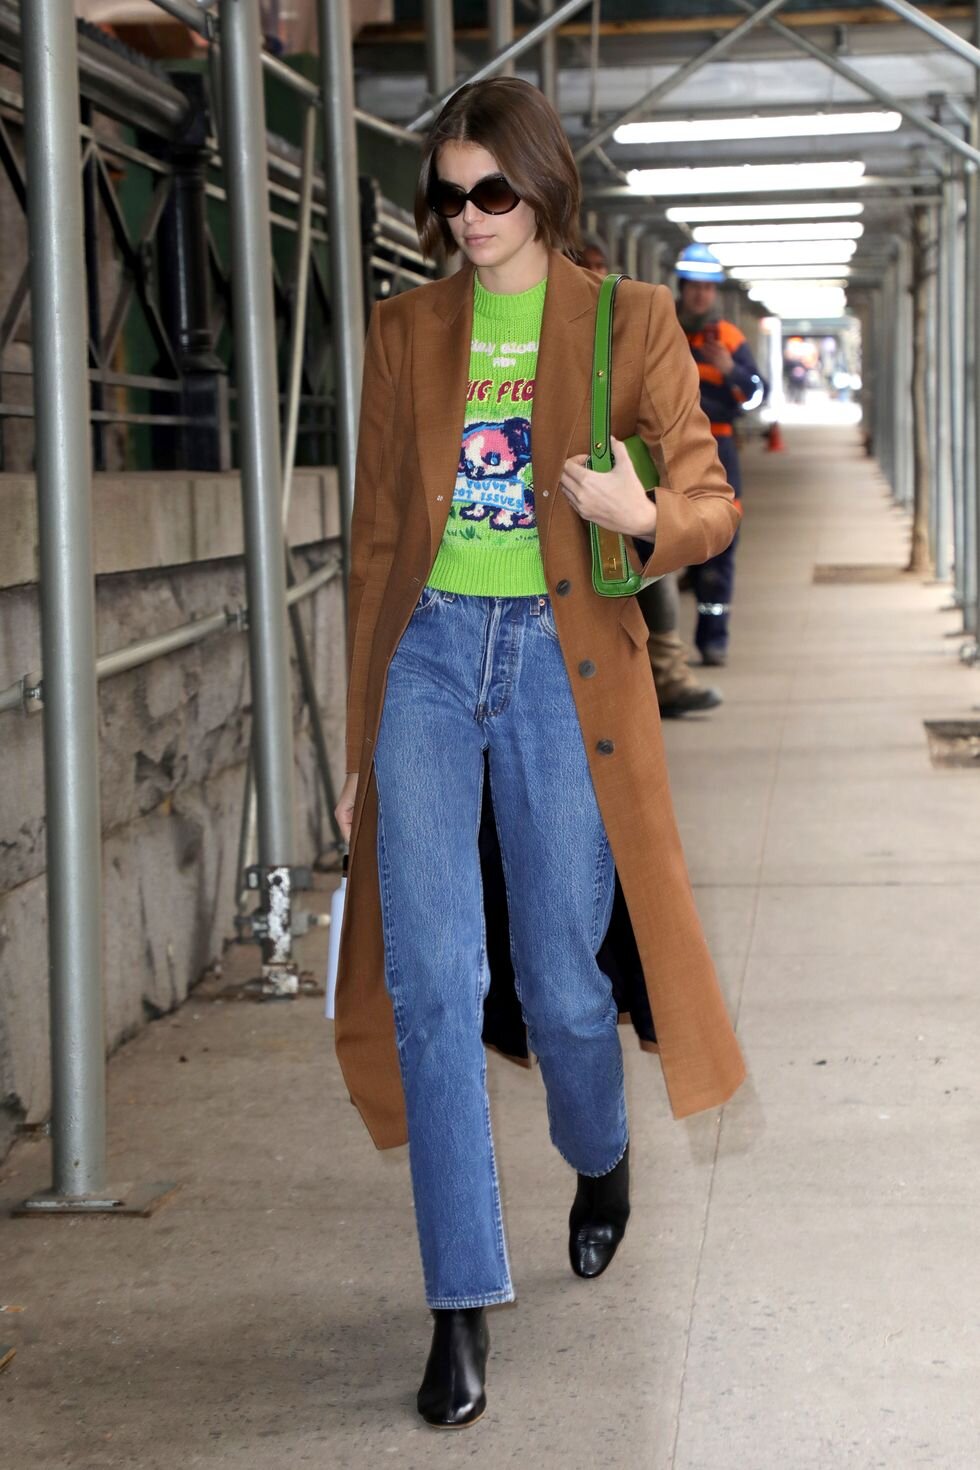 Kaia Gerber street style February 2020, styled by Andrew Mukamal